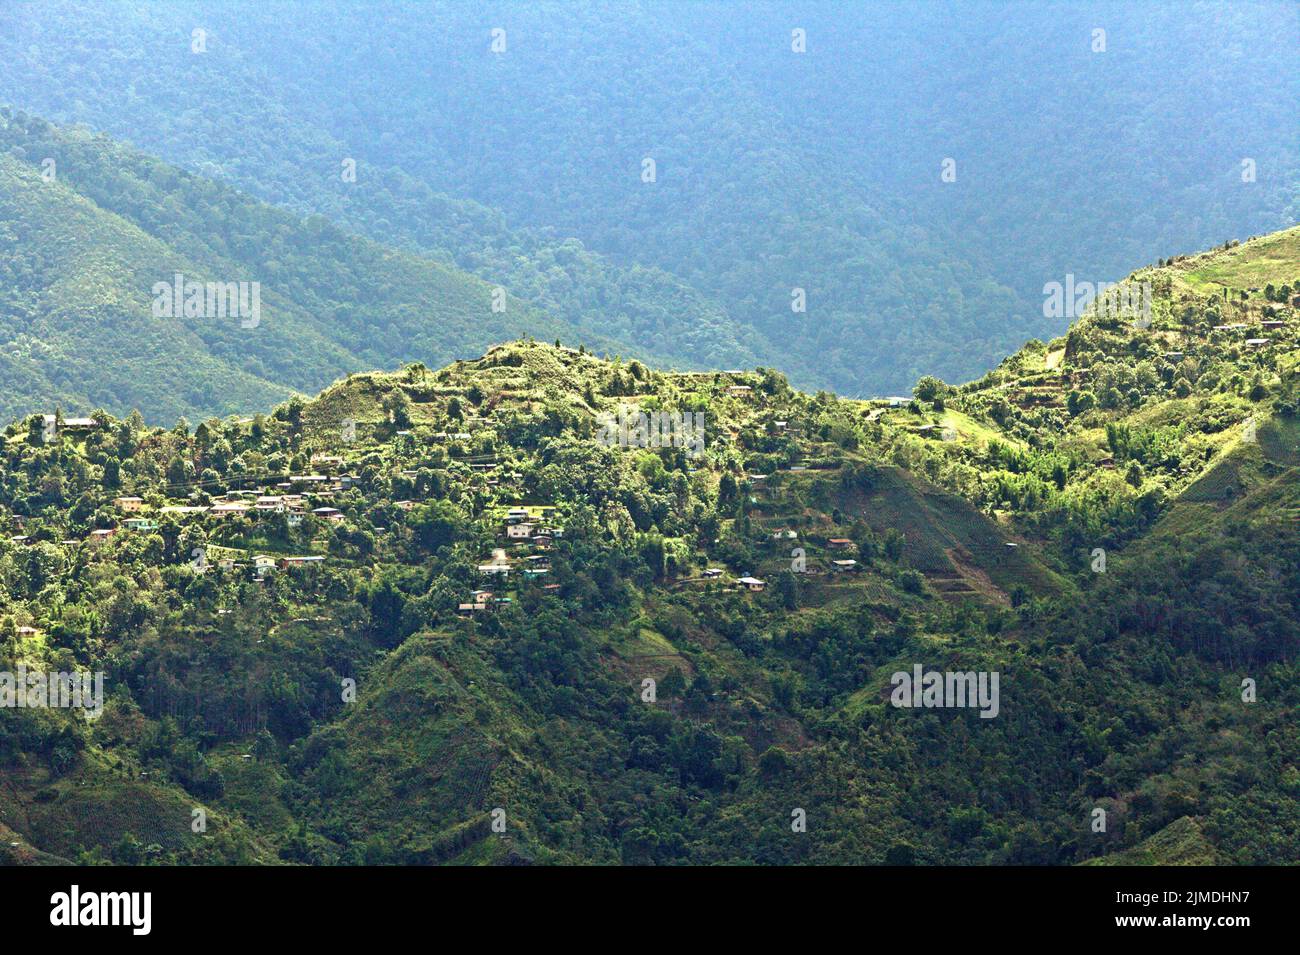 Landscape of a village on a hill at the foot of Mount Kinabalu in Sabah, Malaysia. Stock Photo